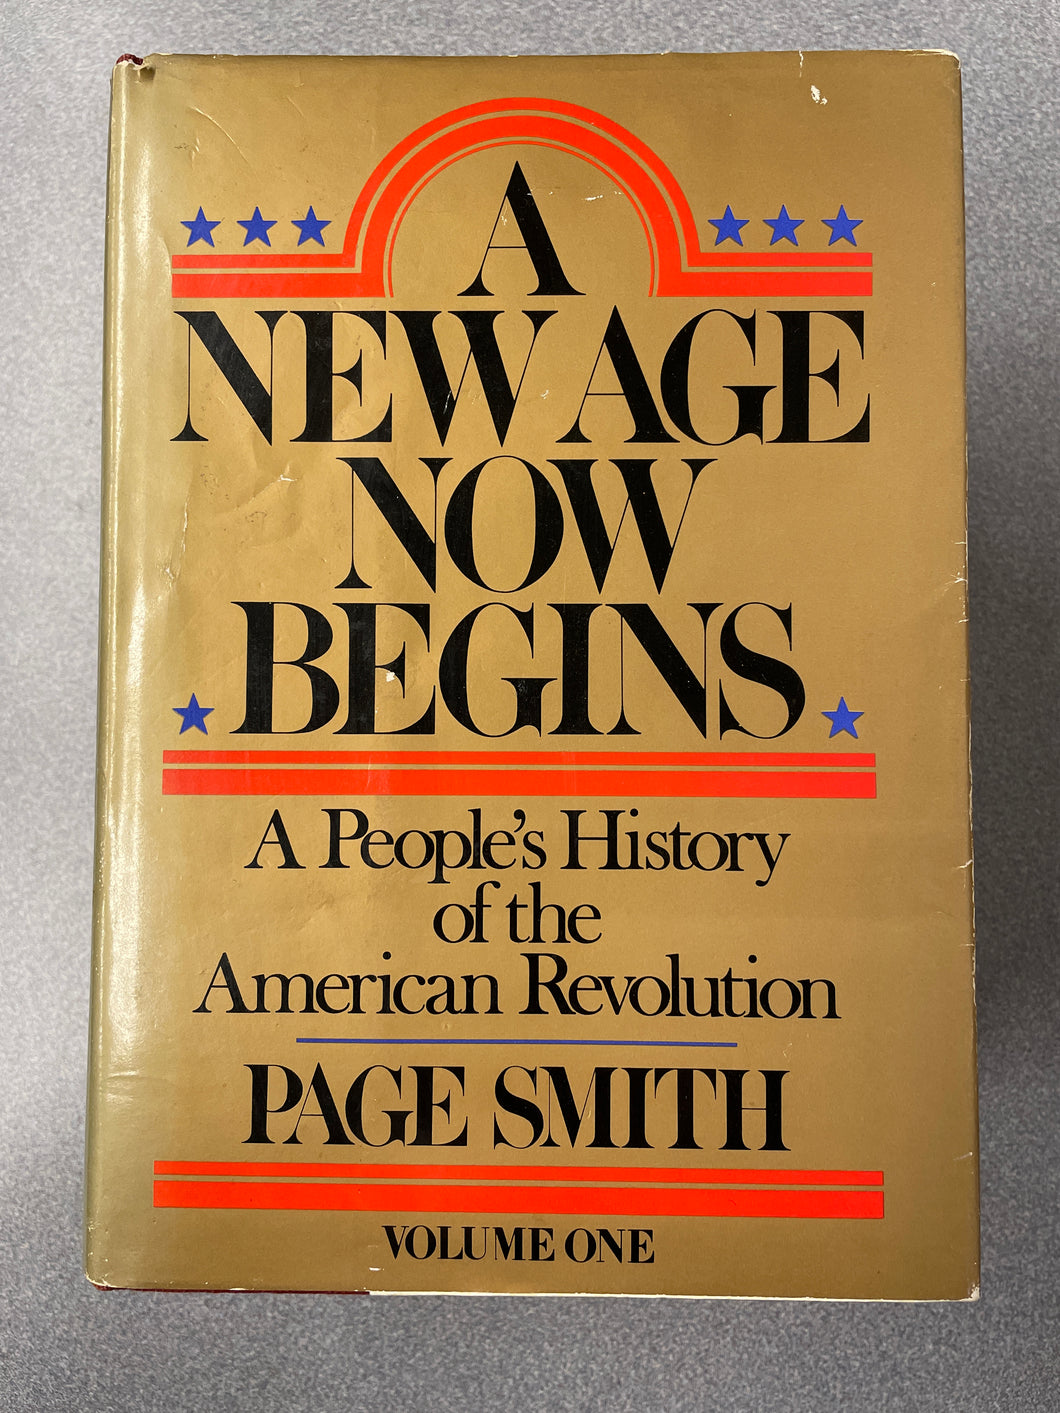 SS A New Age Now Begins: A People's History of the American Revolution, Volumes One and Two, Smith, Page [1976] N 4/24